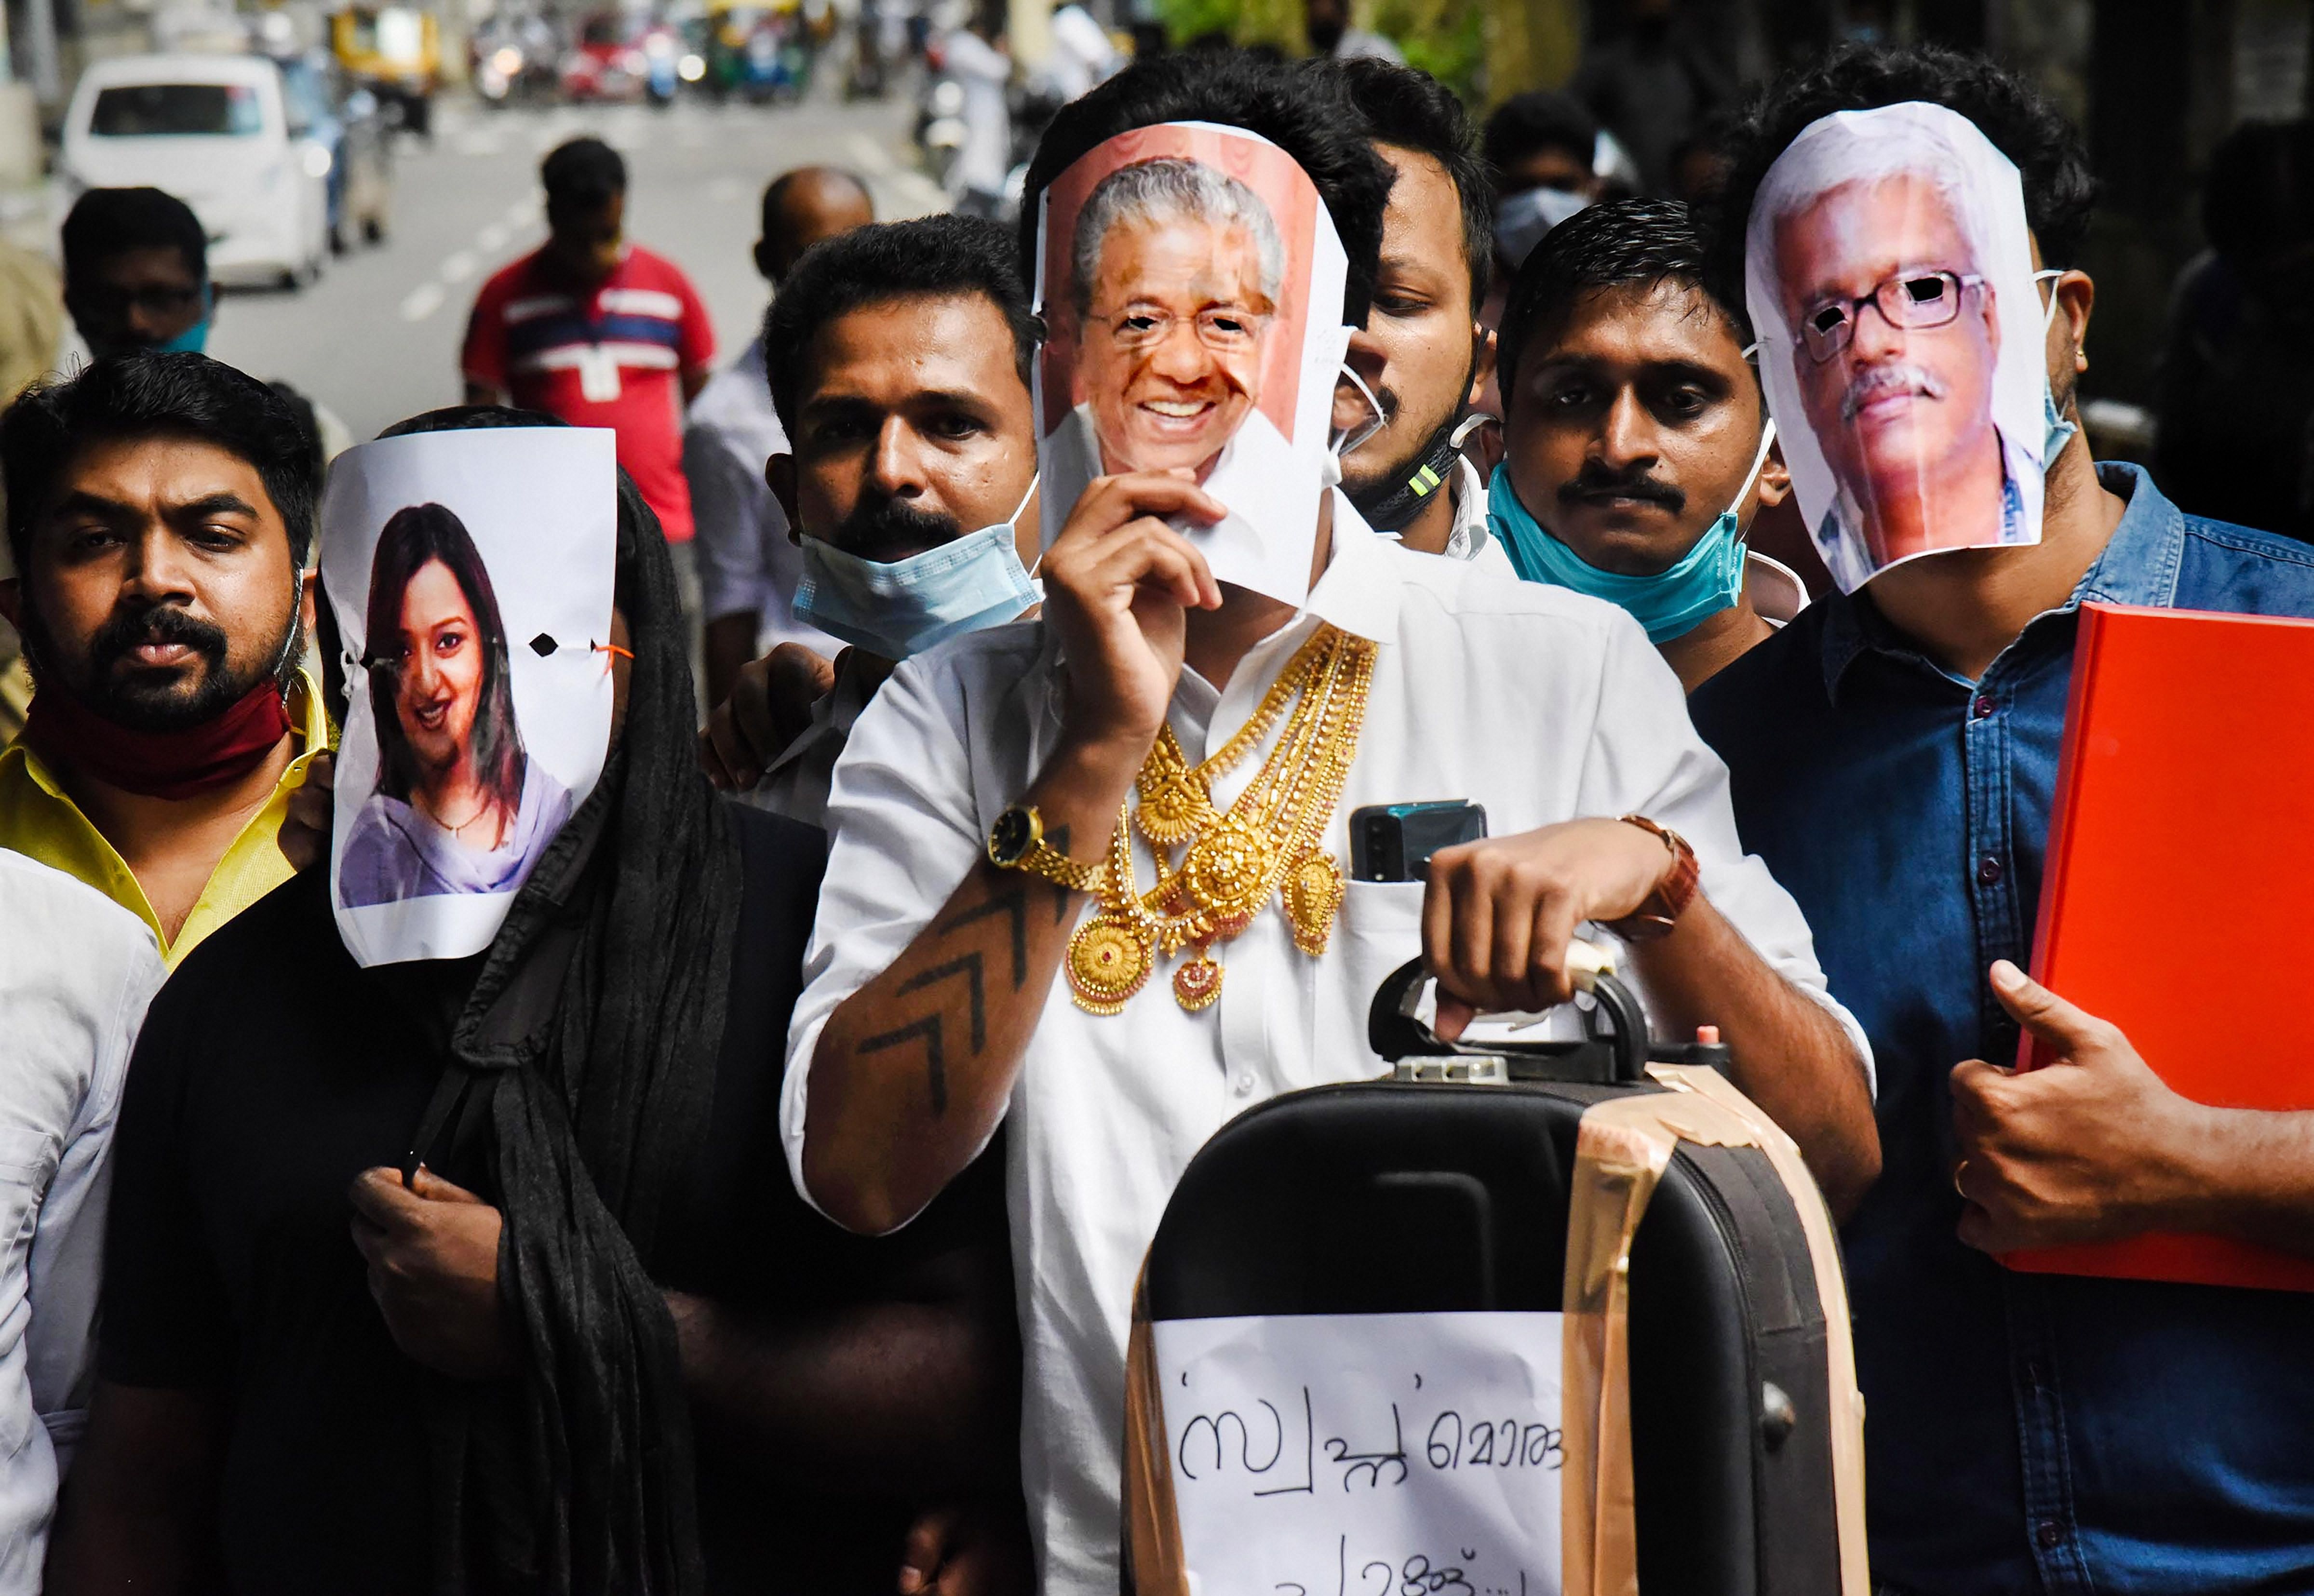 Youth Congress activists hold pictures of Kerala Chief Minister Pinarayi Vijayan (C), former UAE consulate officer Swapna Suresh (L), and State IT Secretary M Sivasankar (R) during a protest over the Kerala gold smuggling case, in Kochi. Credits: PTI Photo